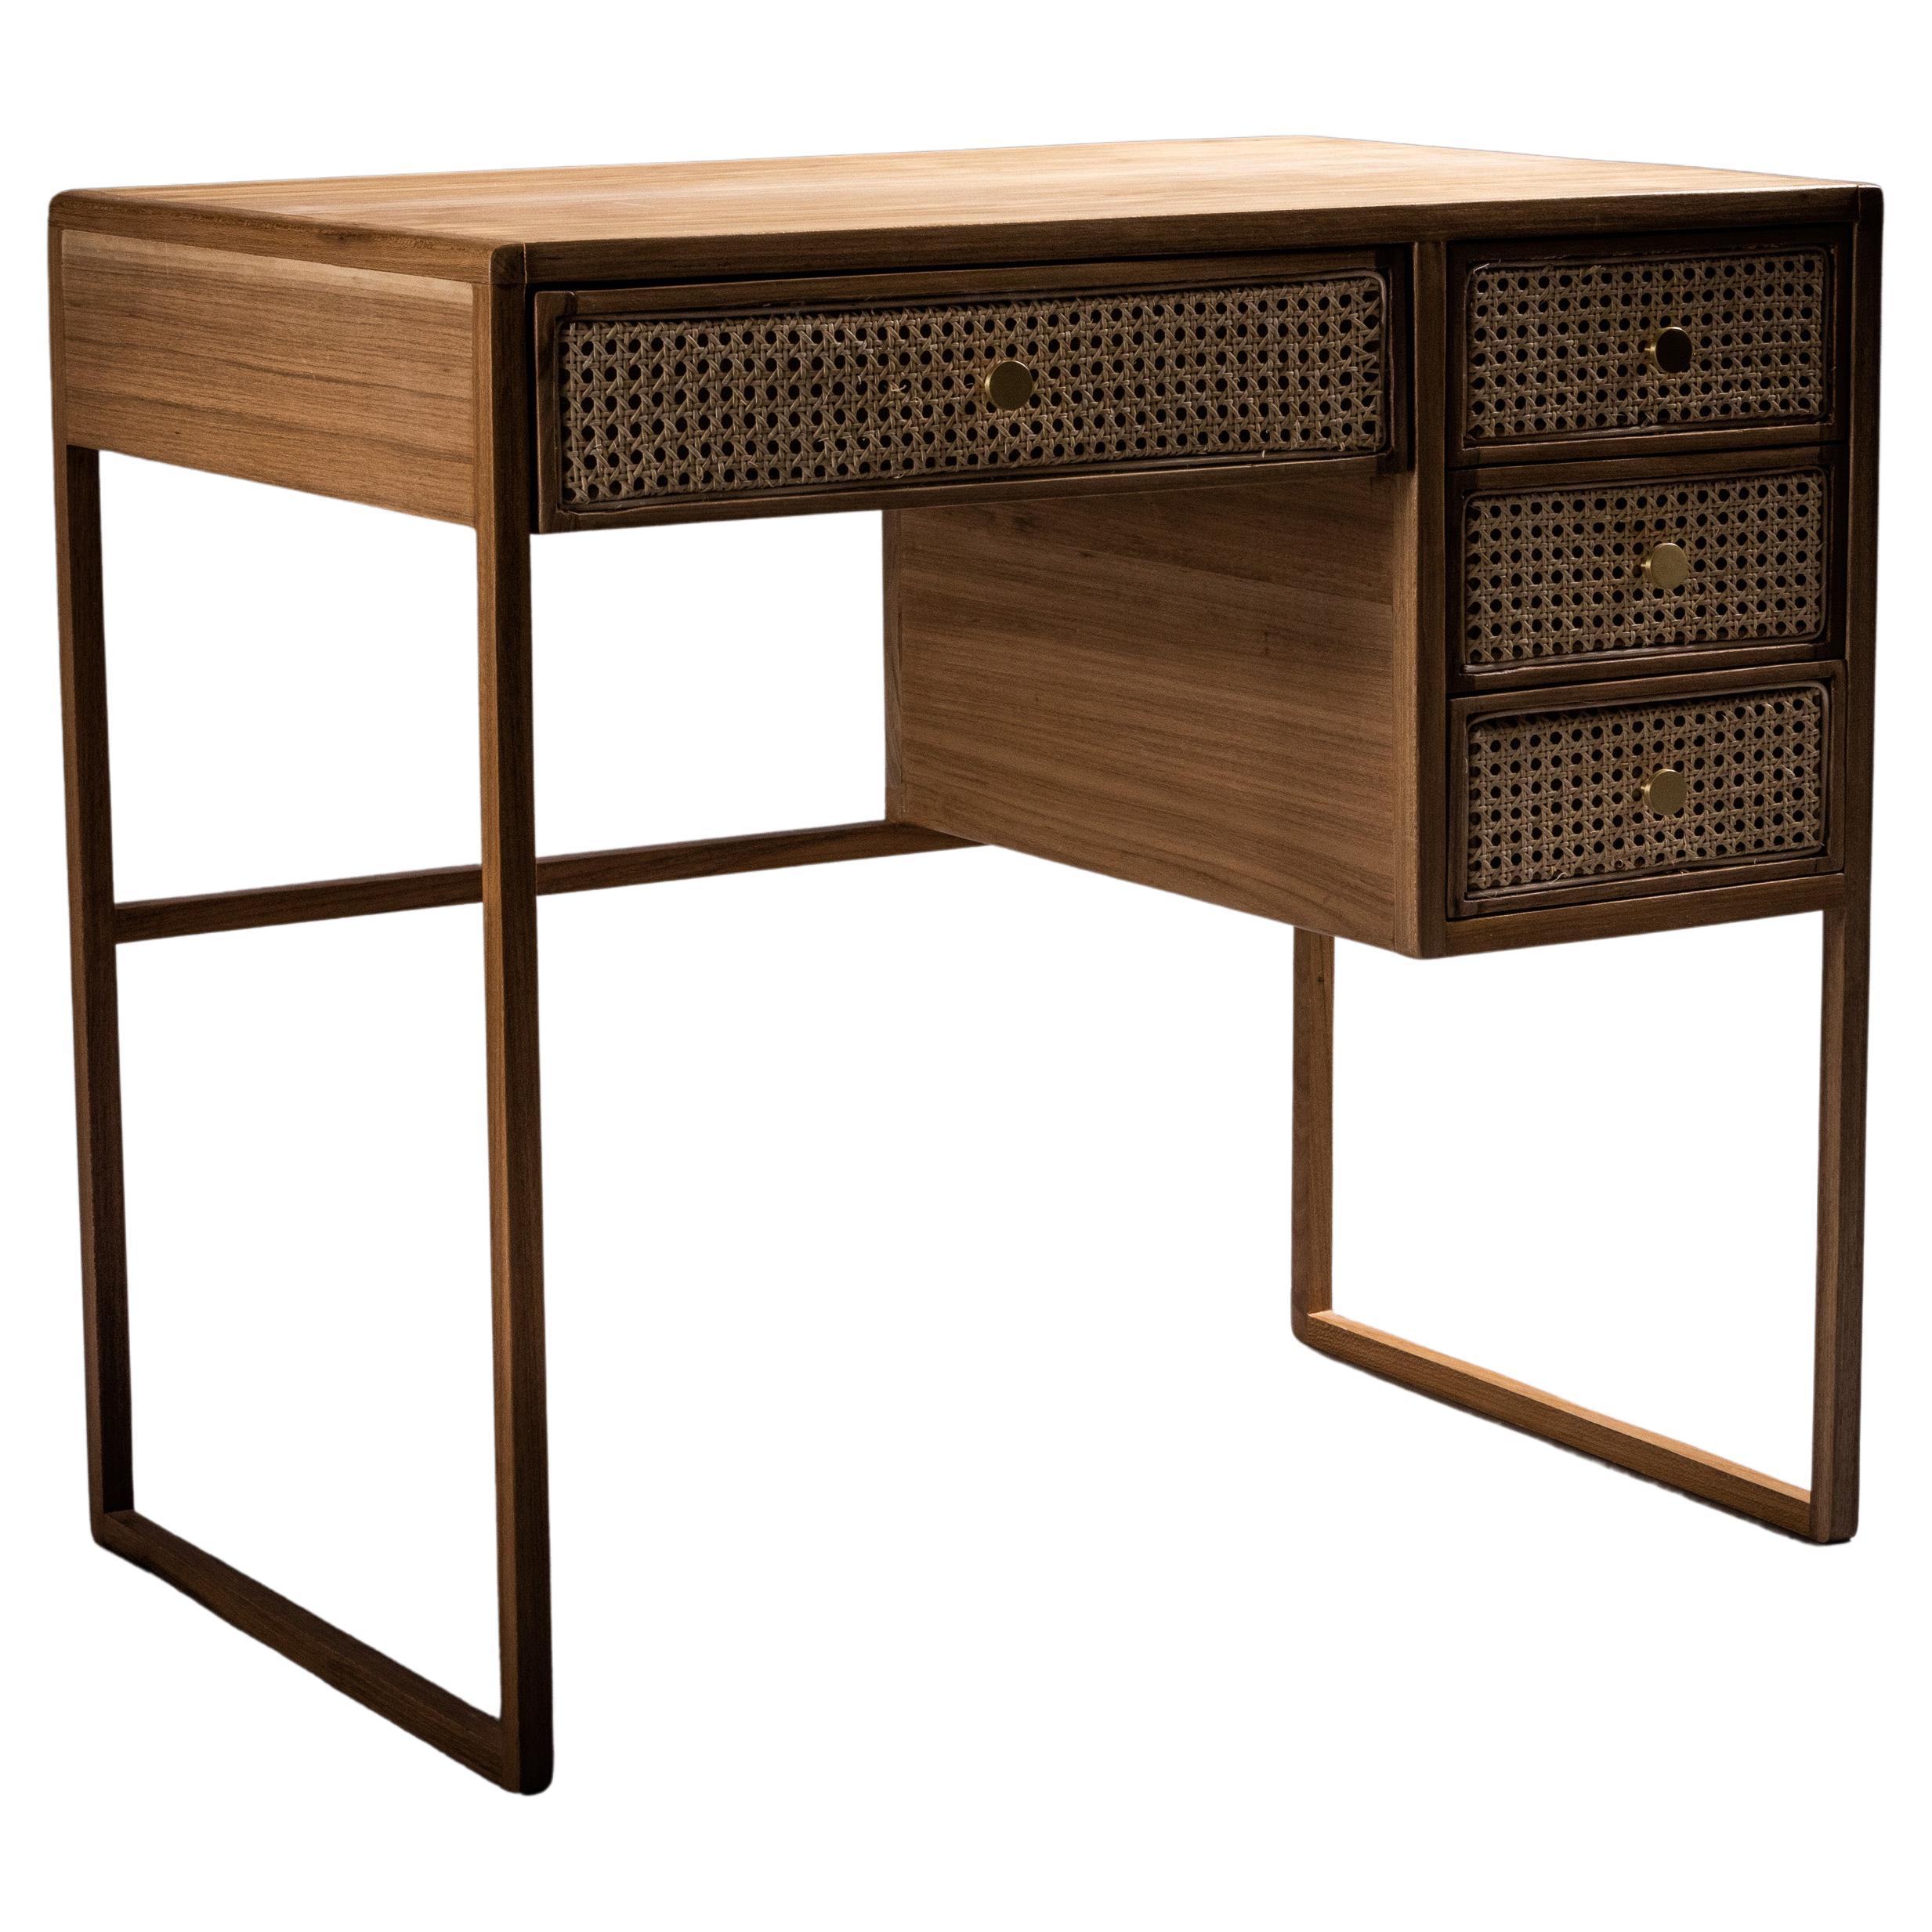 The Chiquita Desk. Brazilian Solid Wood and Natural Straws.